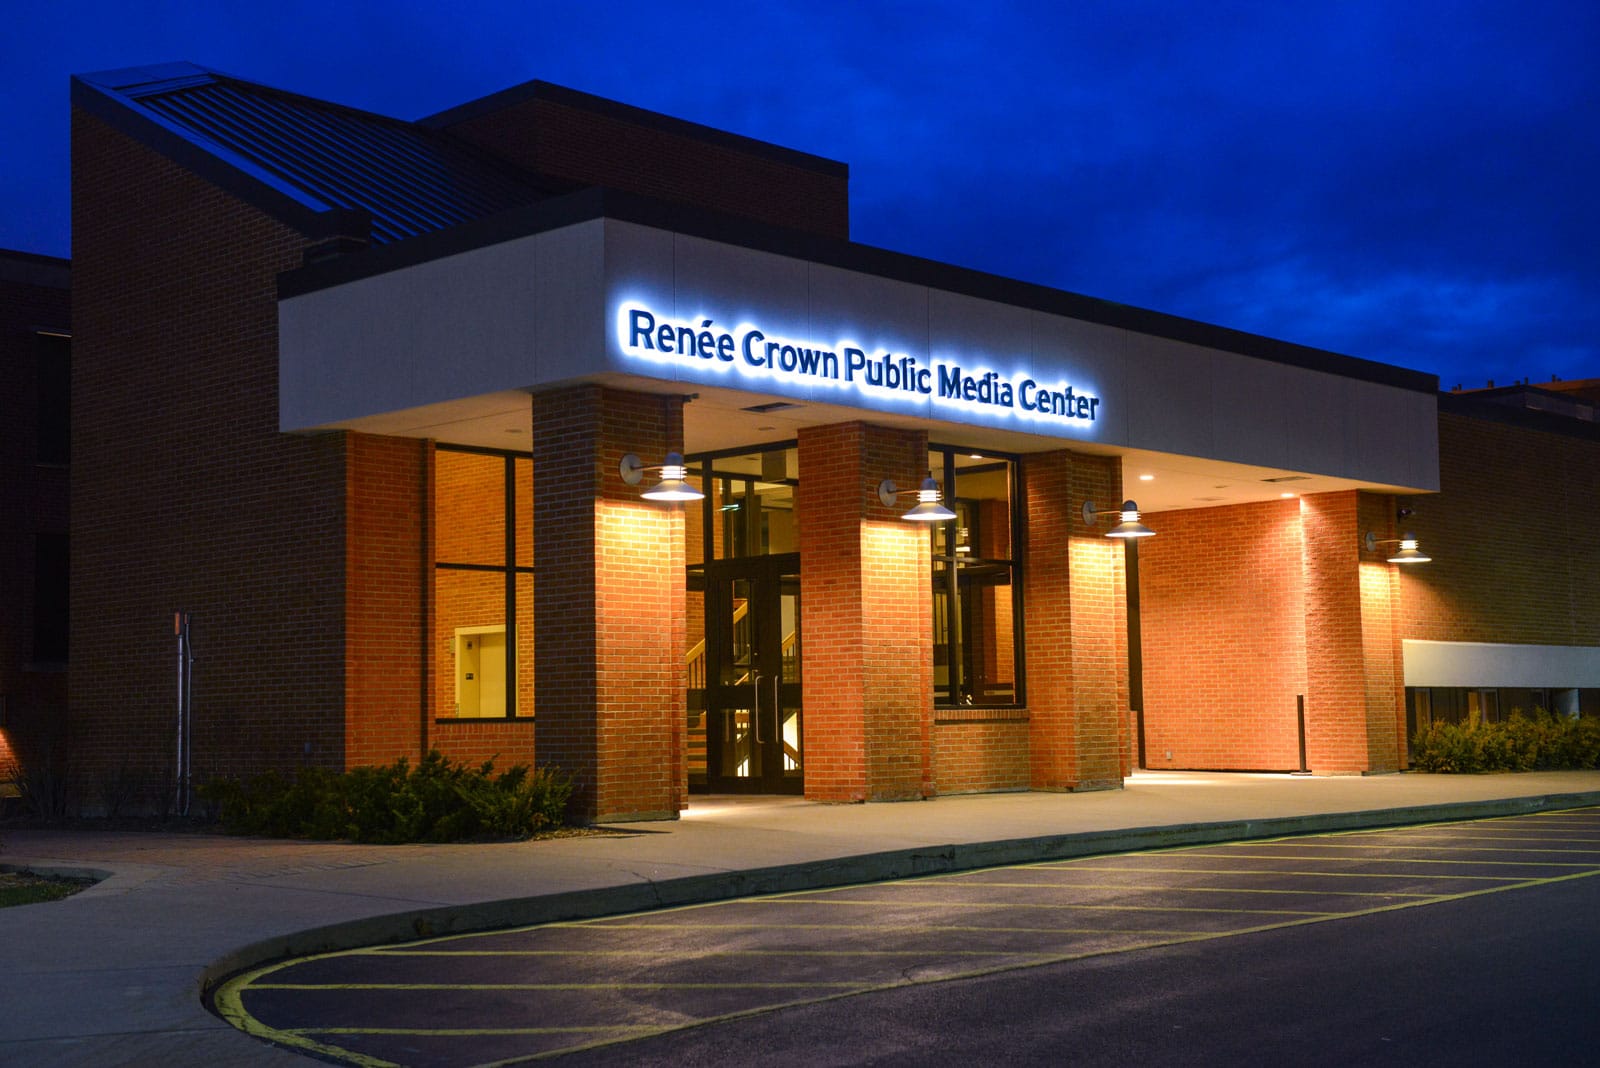 View of Renee Crown Public Media Center exterior at night